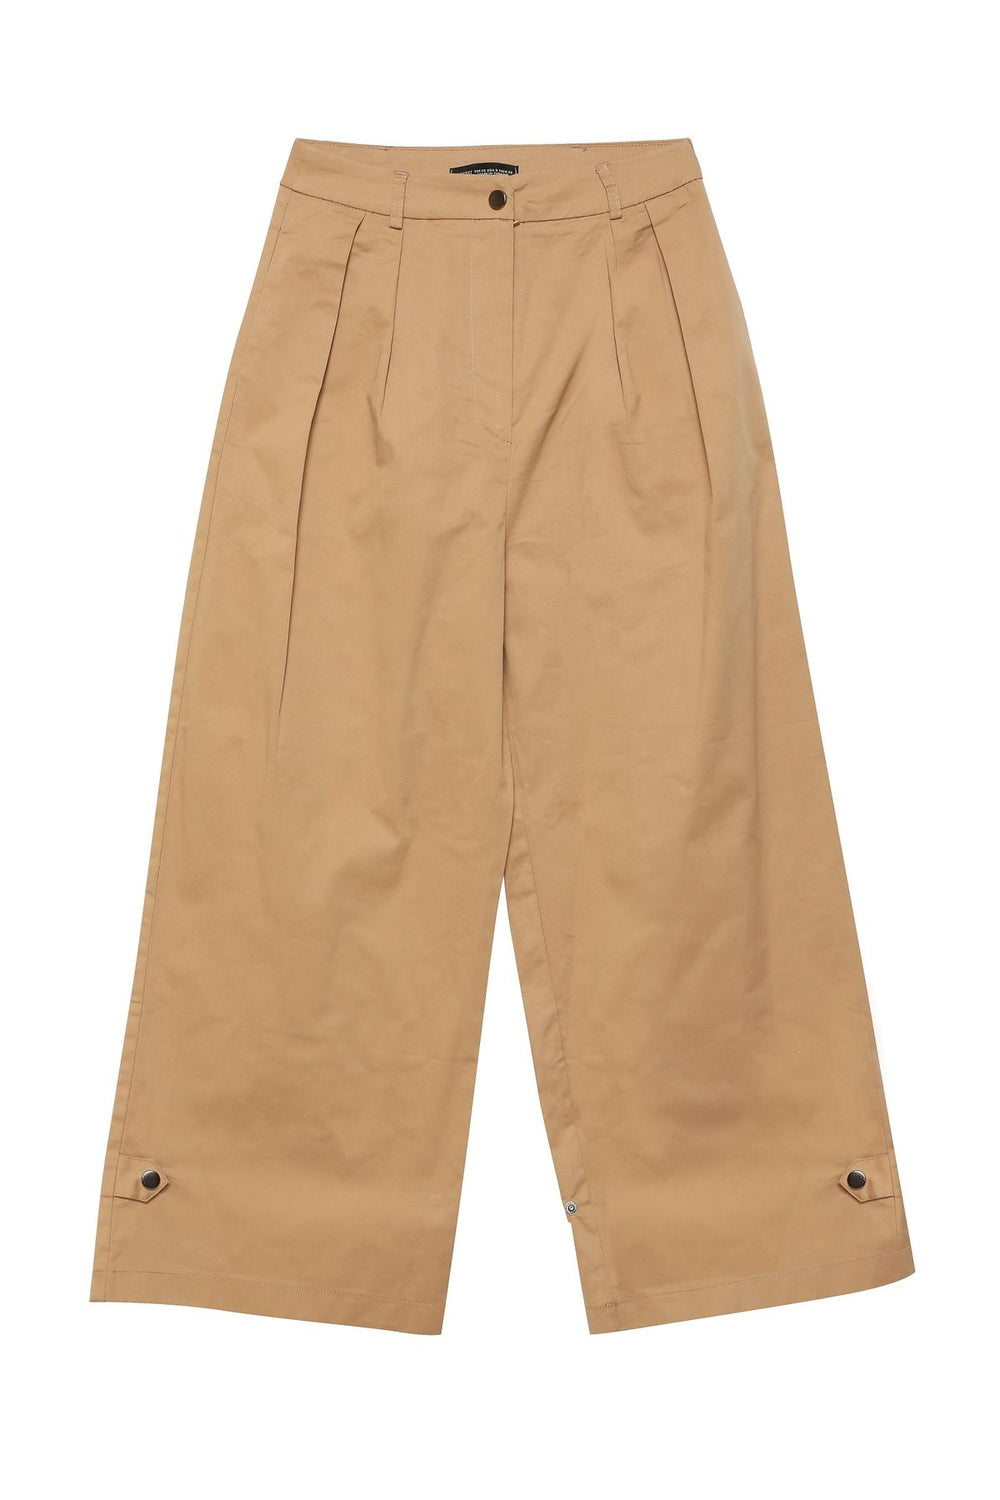 Snap Snap Trousers Camel